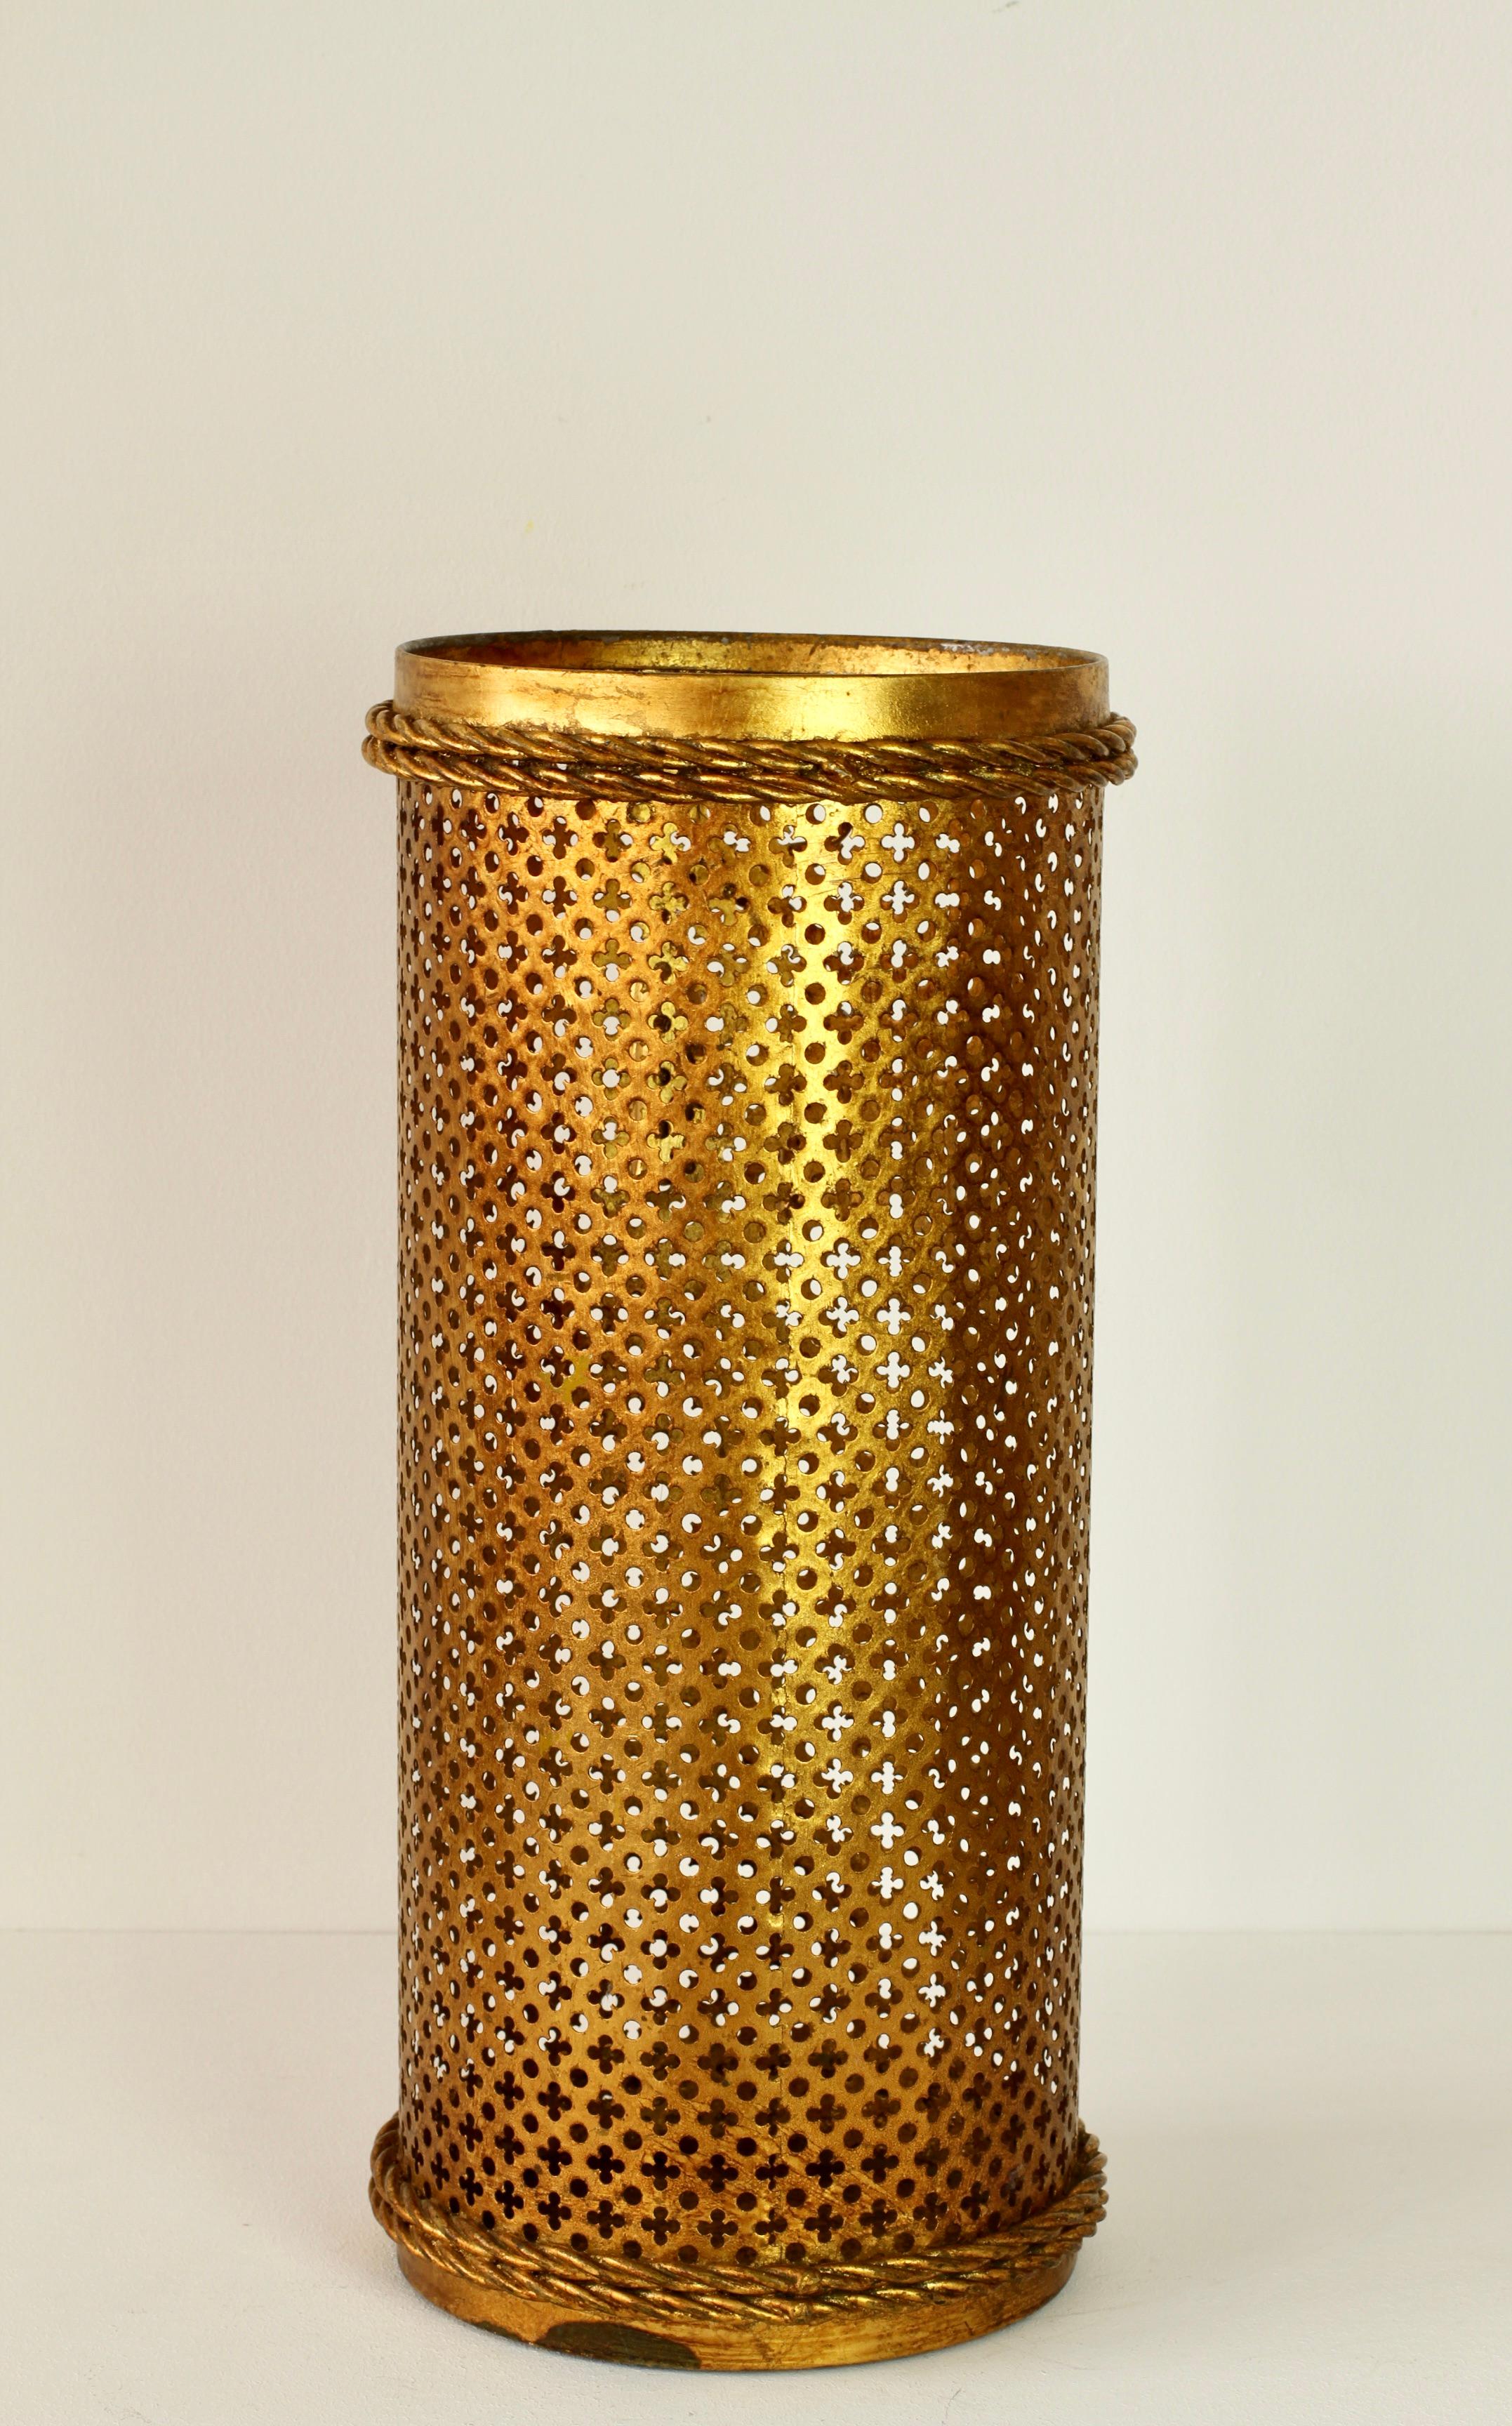 Midcentury Italian Hollywood Regency Gold Gilded Umbrella Stand or Holder, 1950s For Sale 2